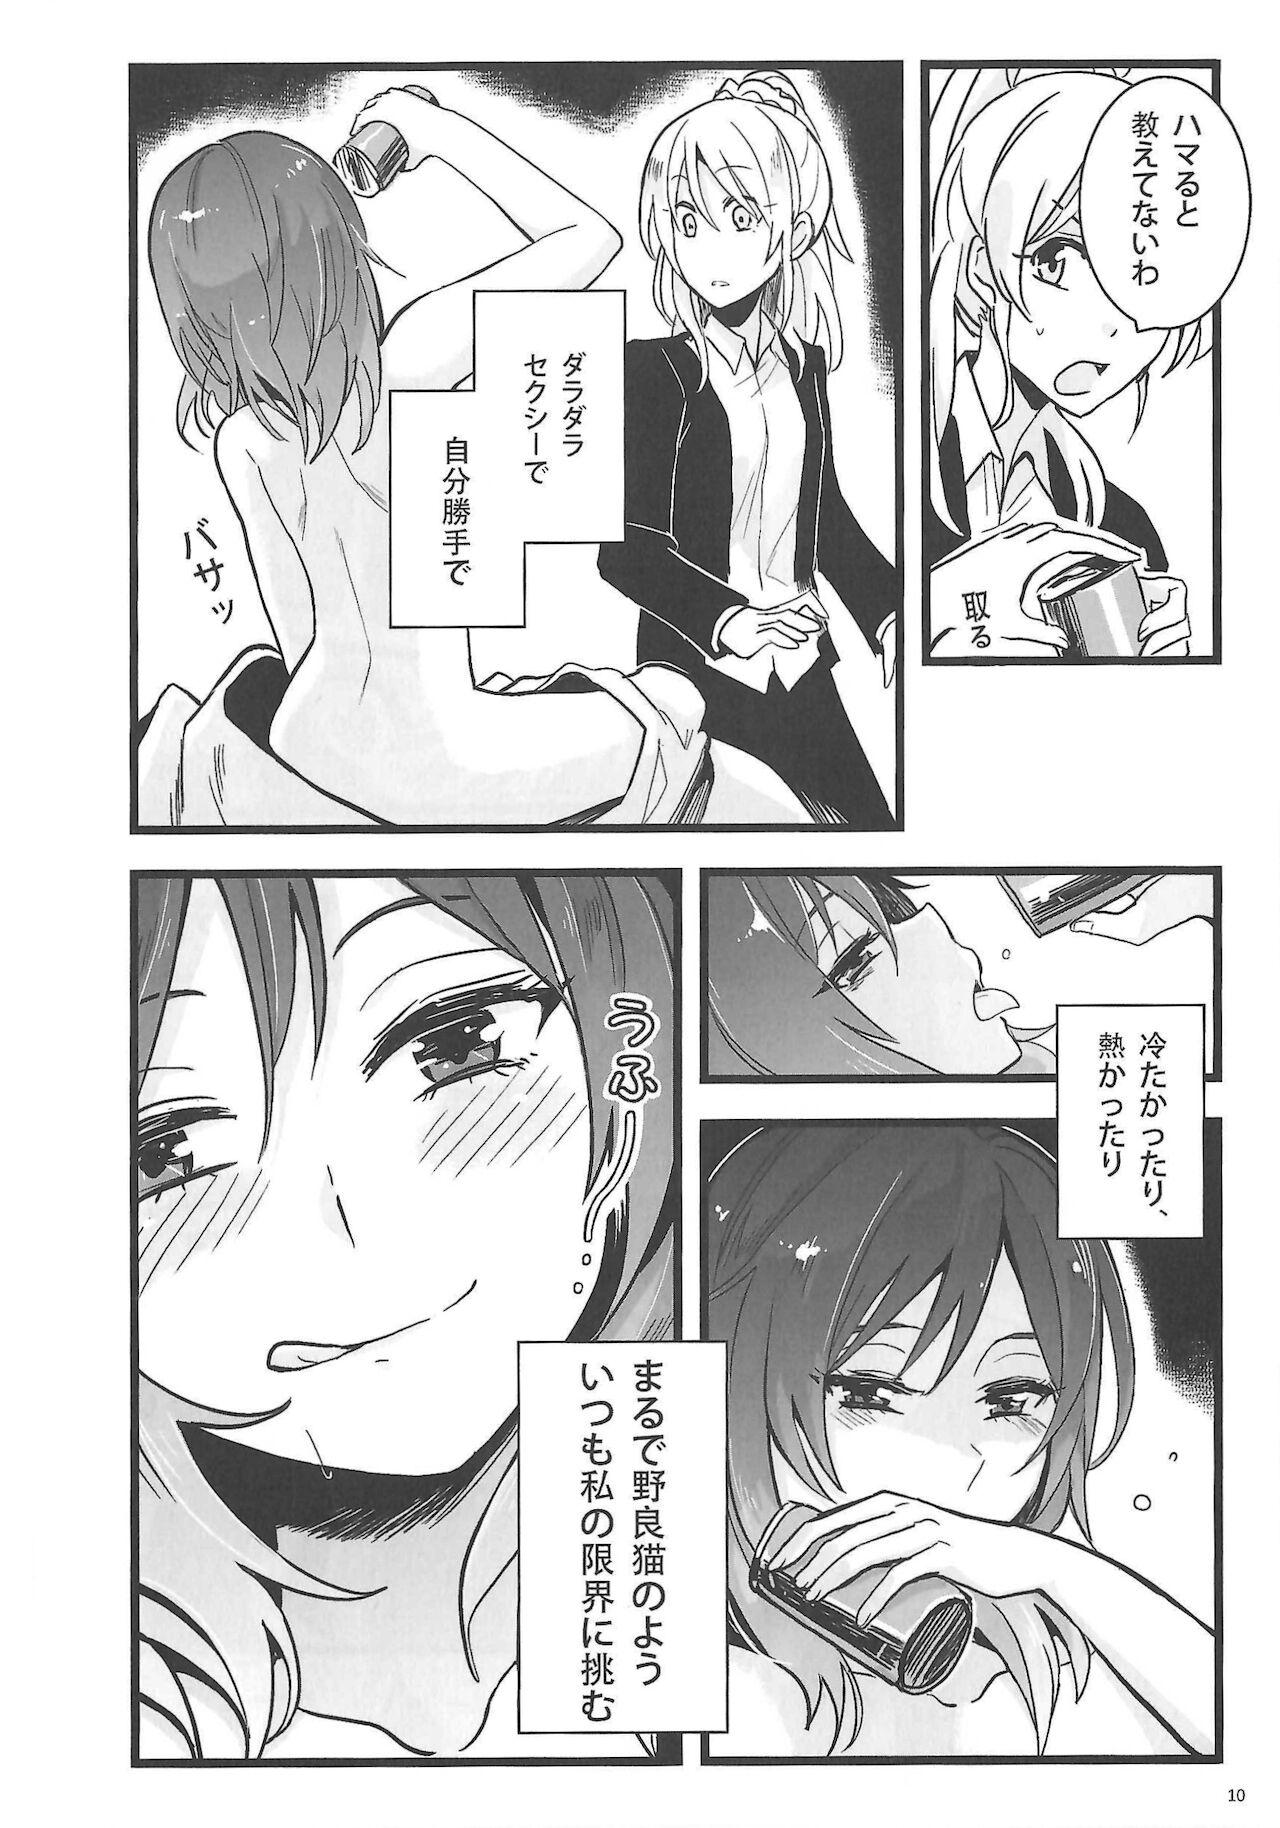 Viet Ode to Losers - Love live Officesex - Page 11